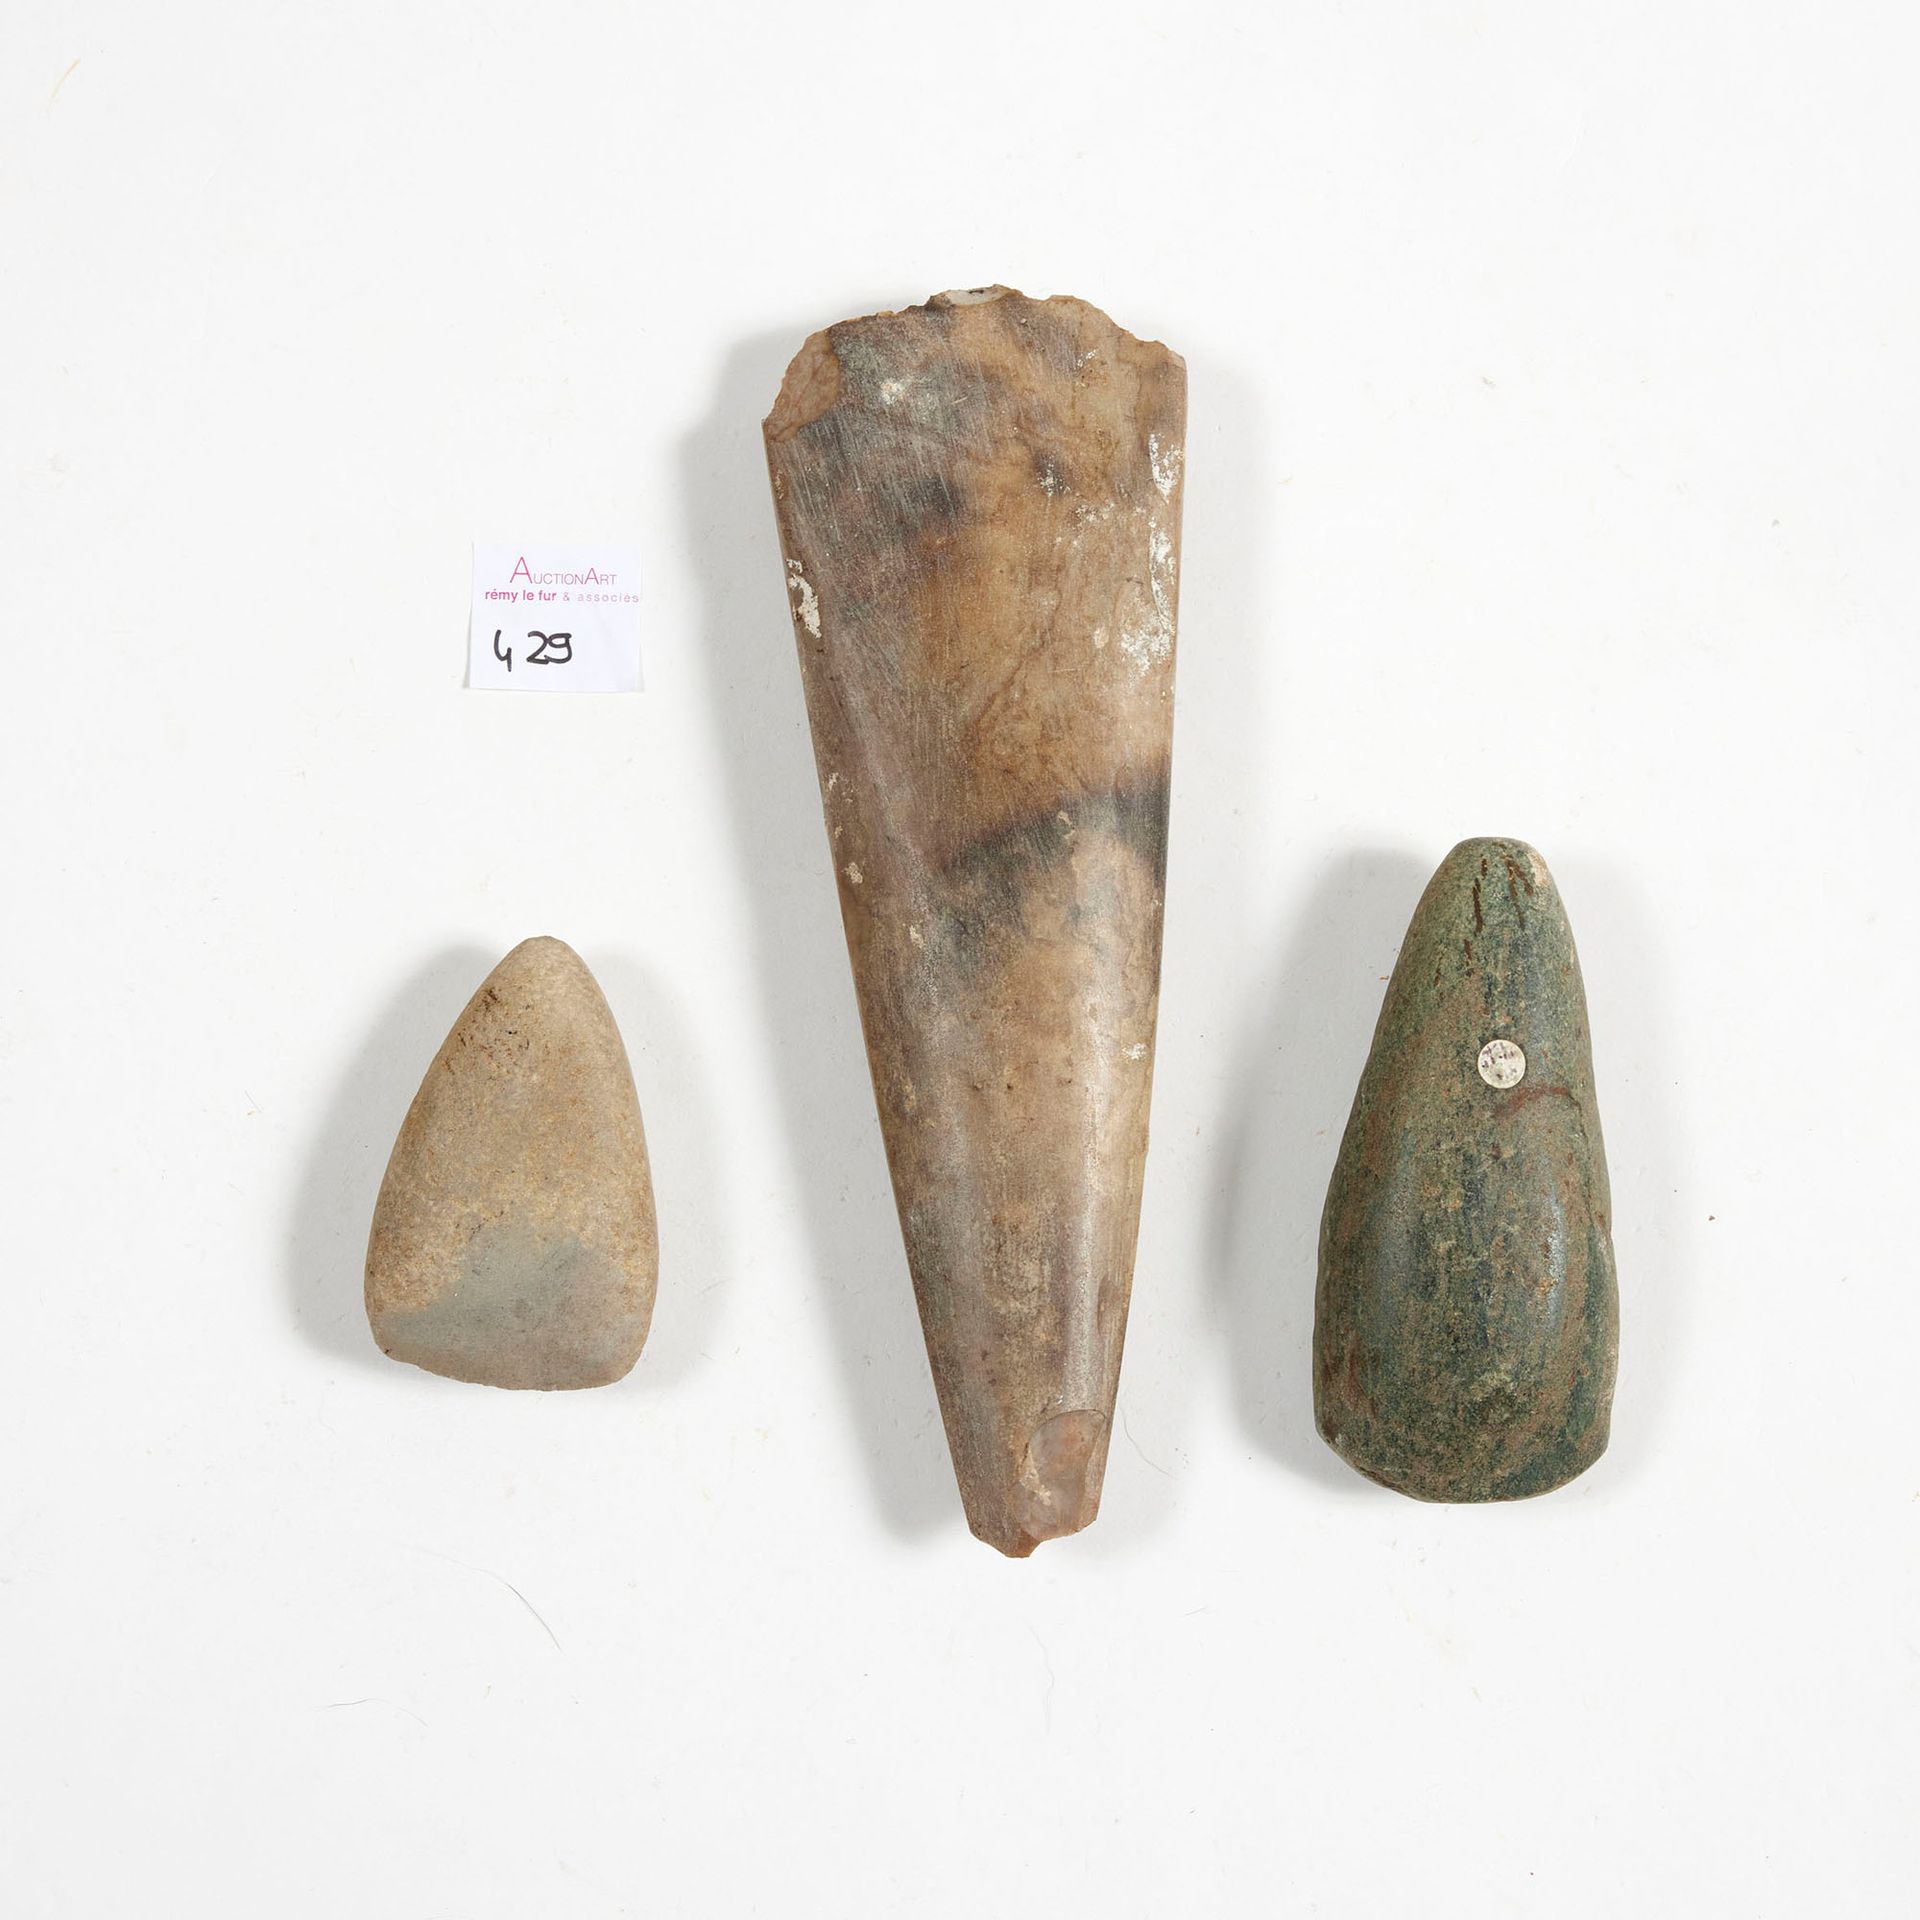 Lot de trois haches Lot of three axes

one in green stone, one in grey stone and&hellip;